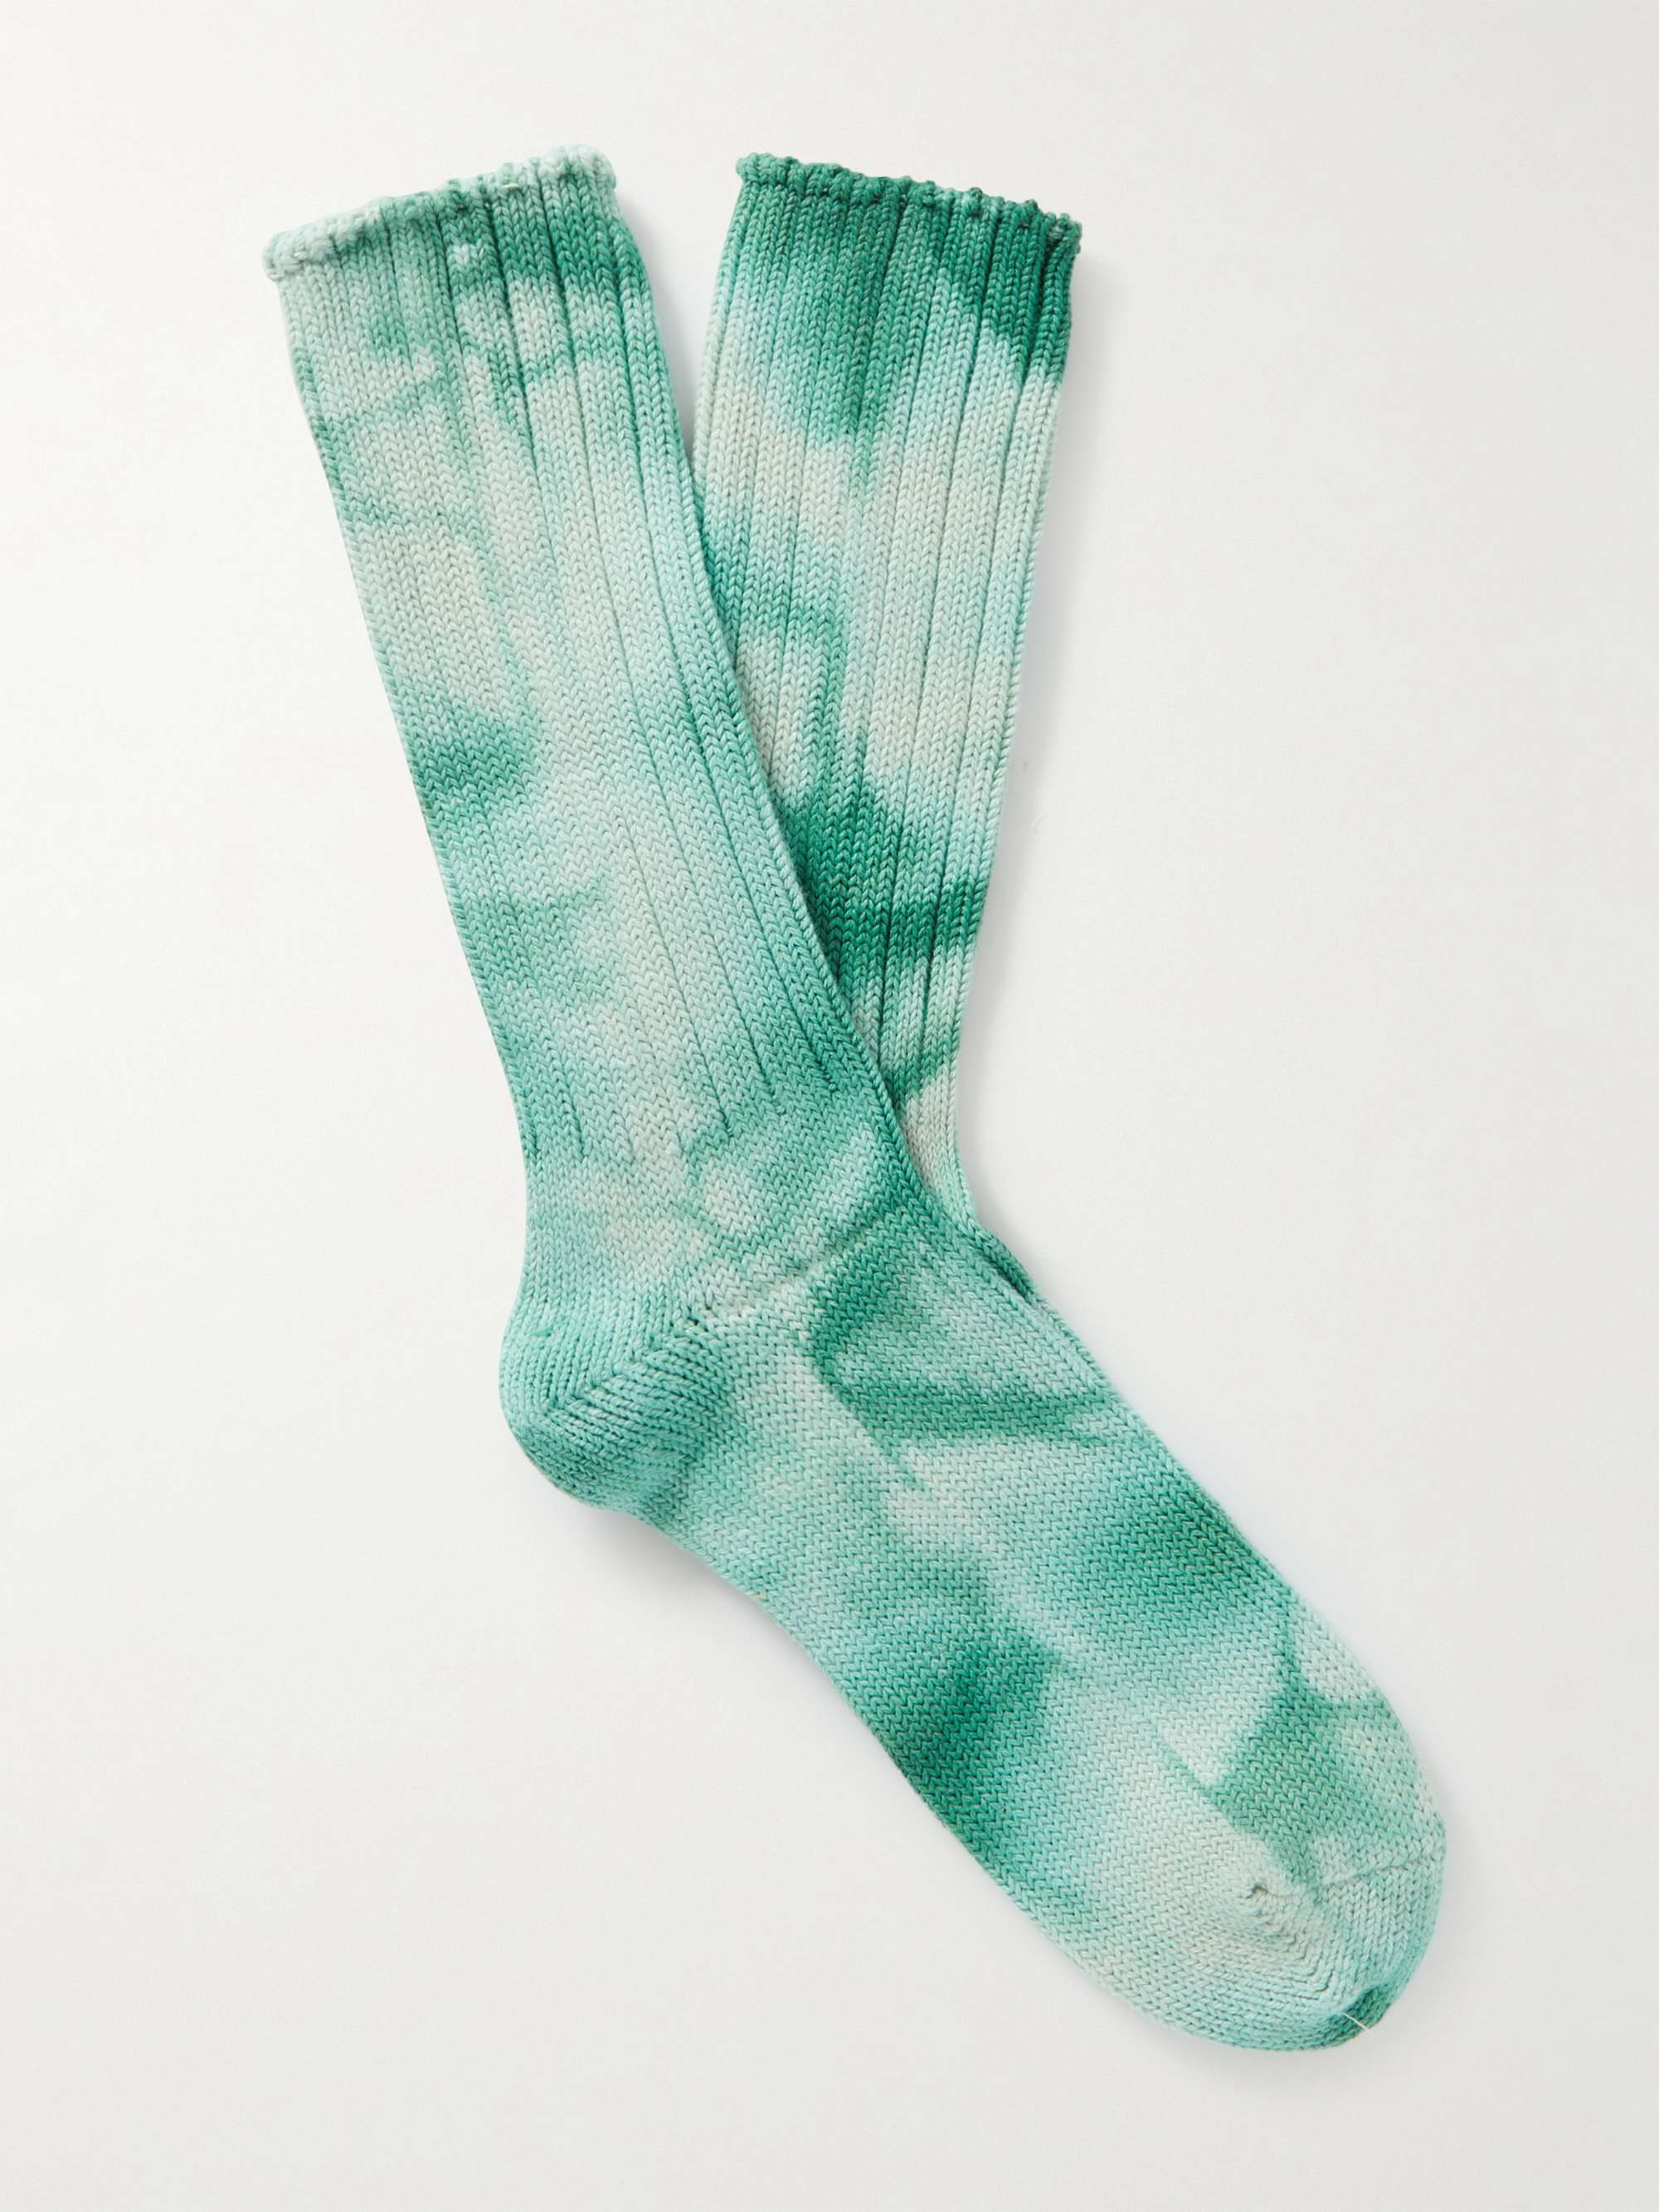 ANONYMOUS ISM Ribbed Tie-Dyed Cotton-Blend Socks